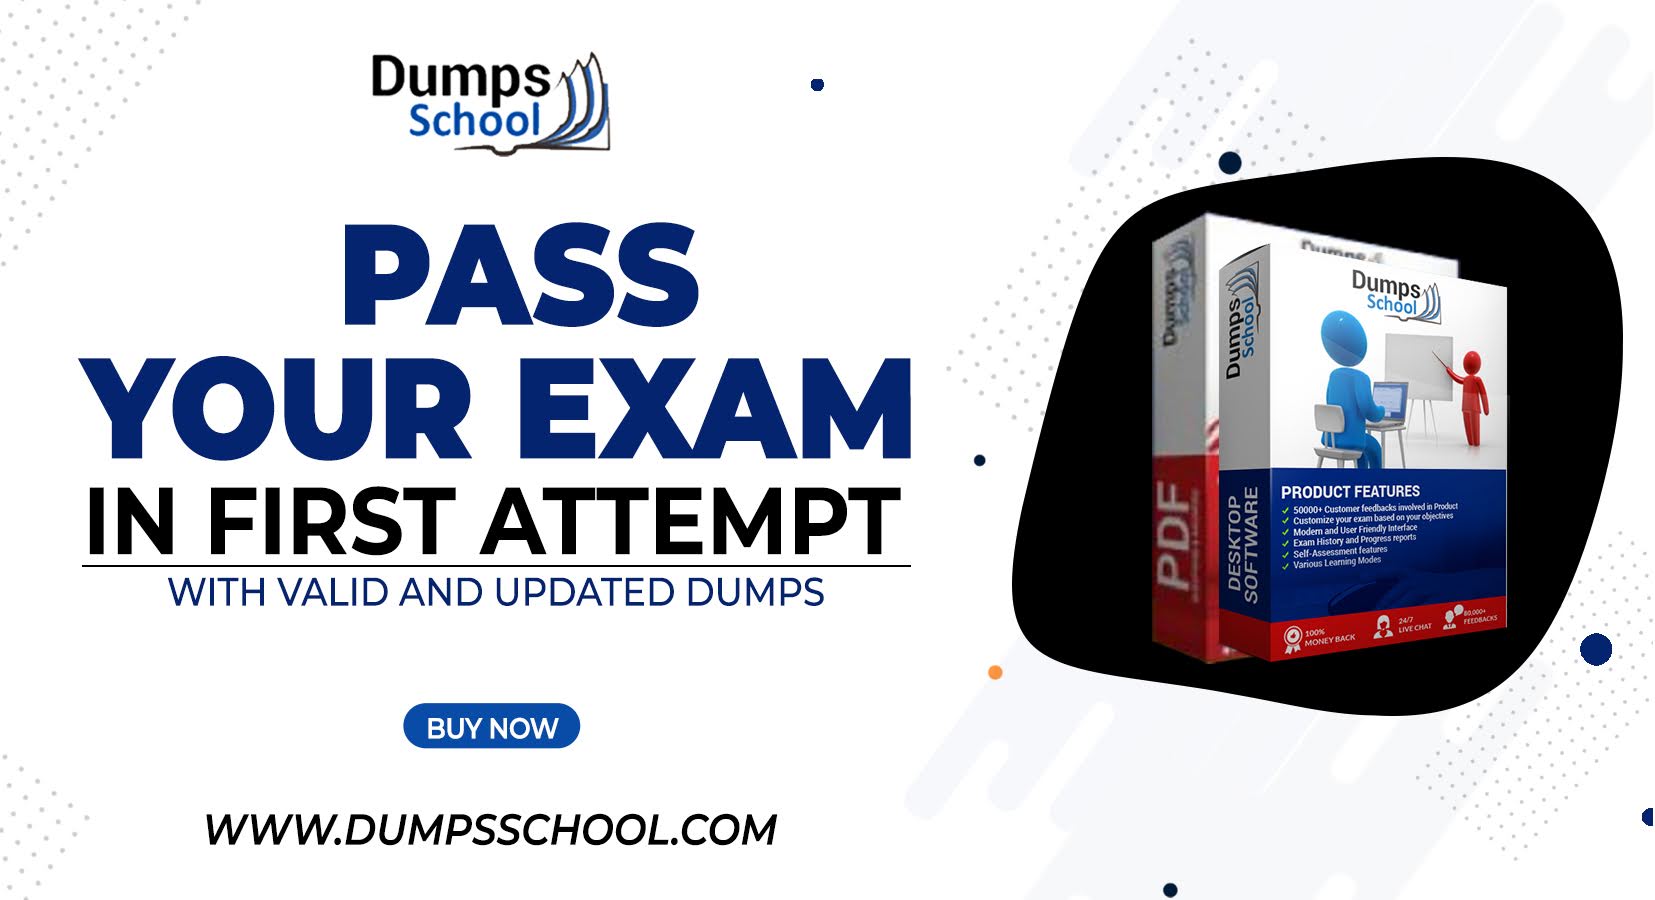 [April] Exam SAP C_CPI_13 Dumps Are Available - Download Now